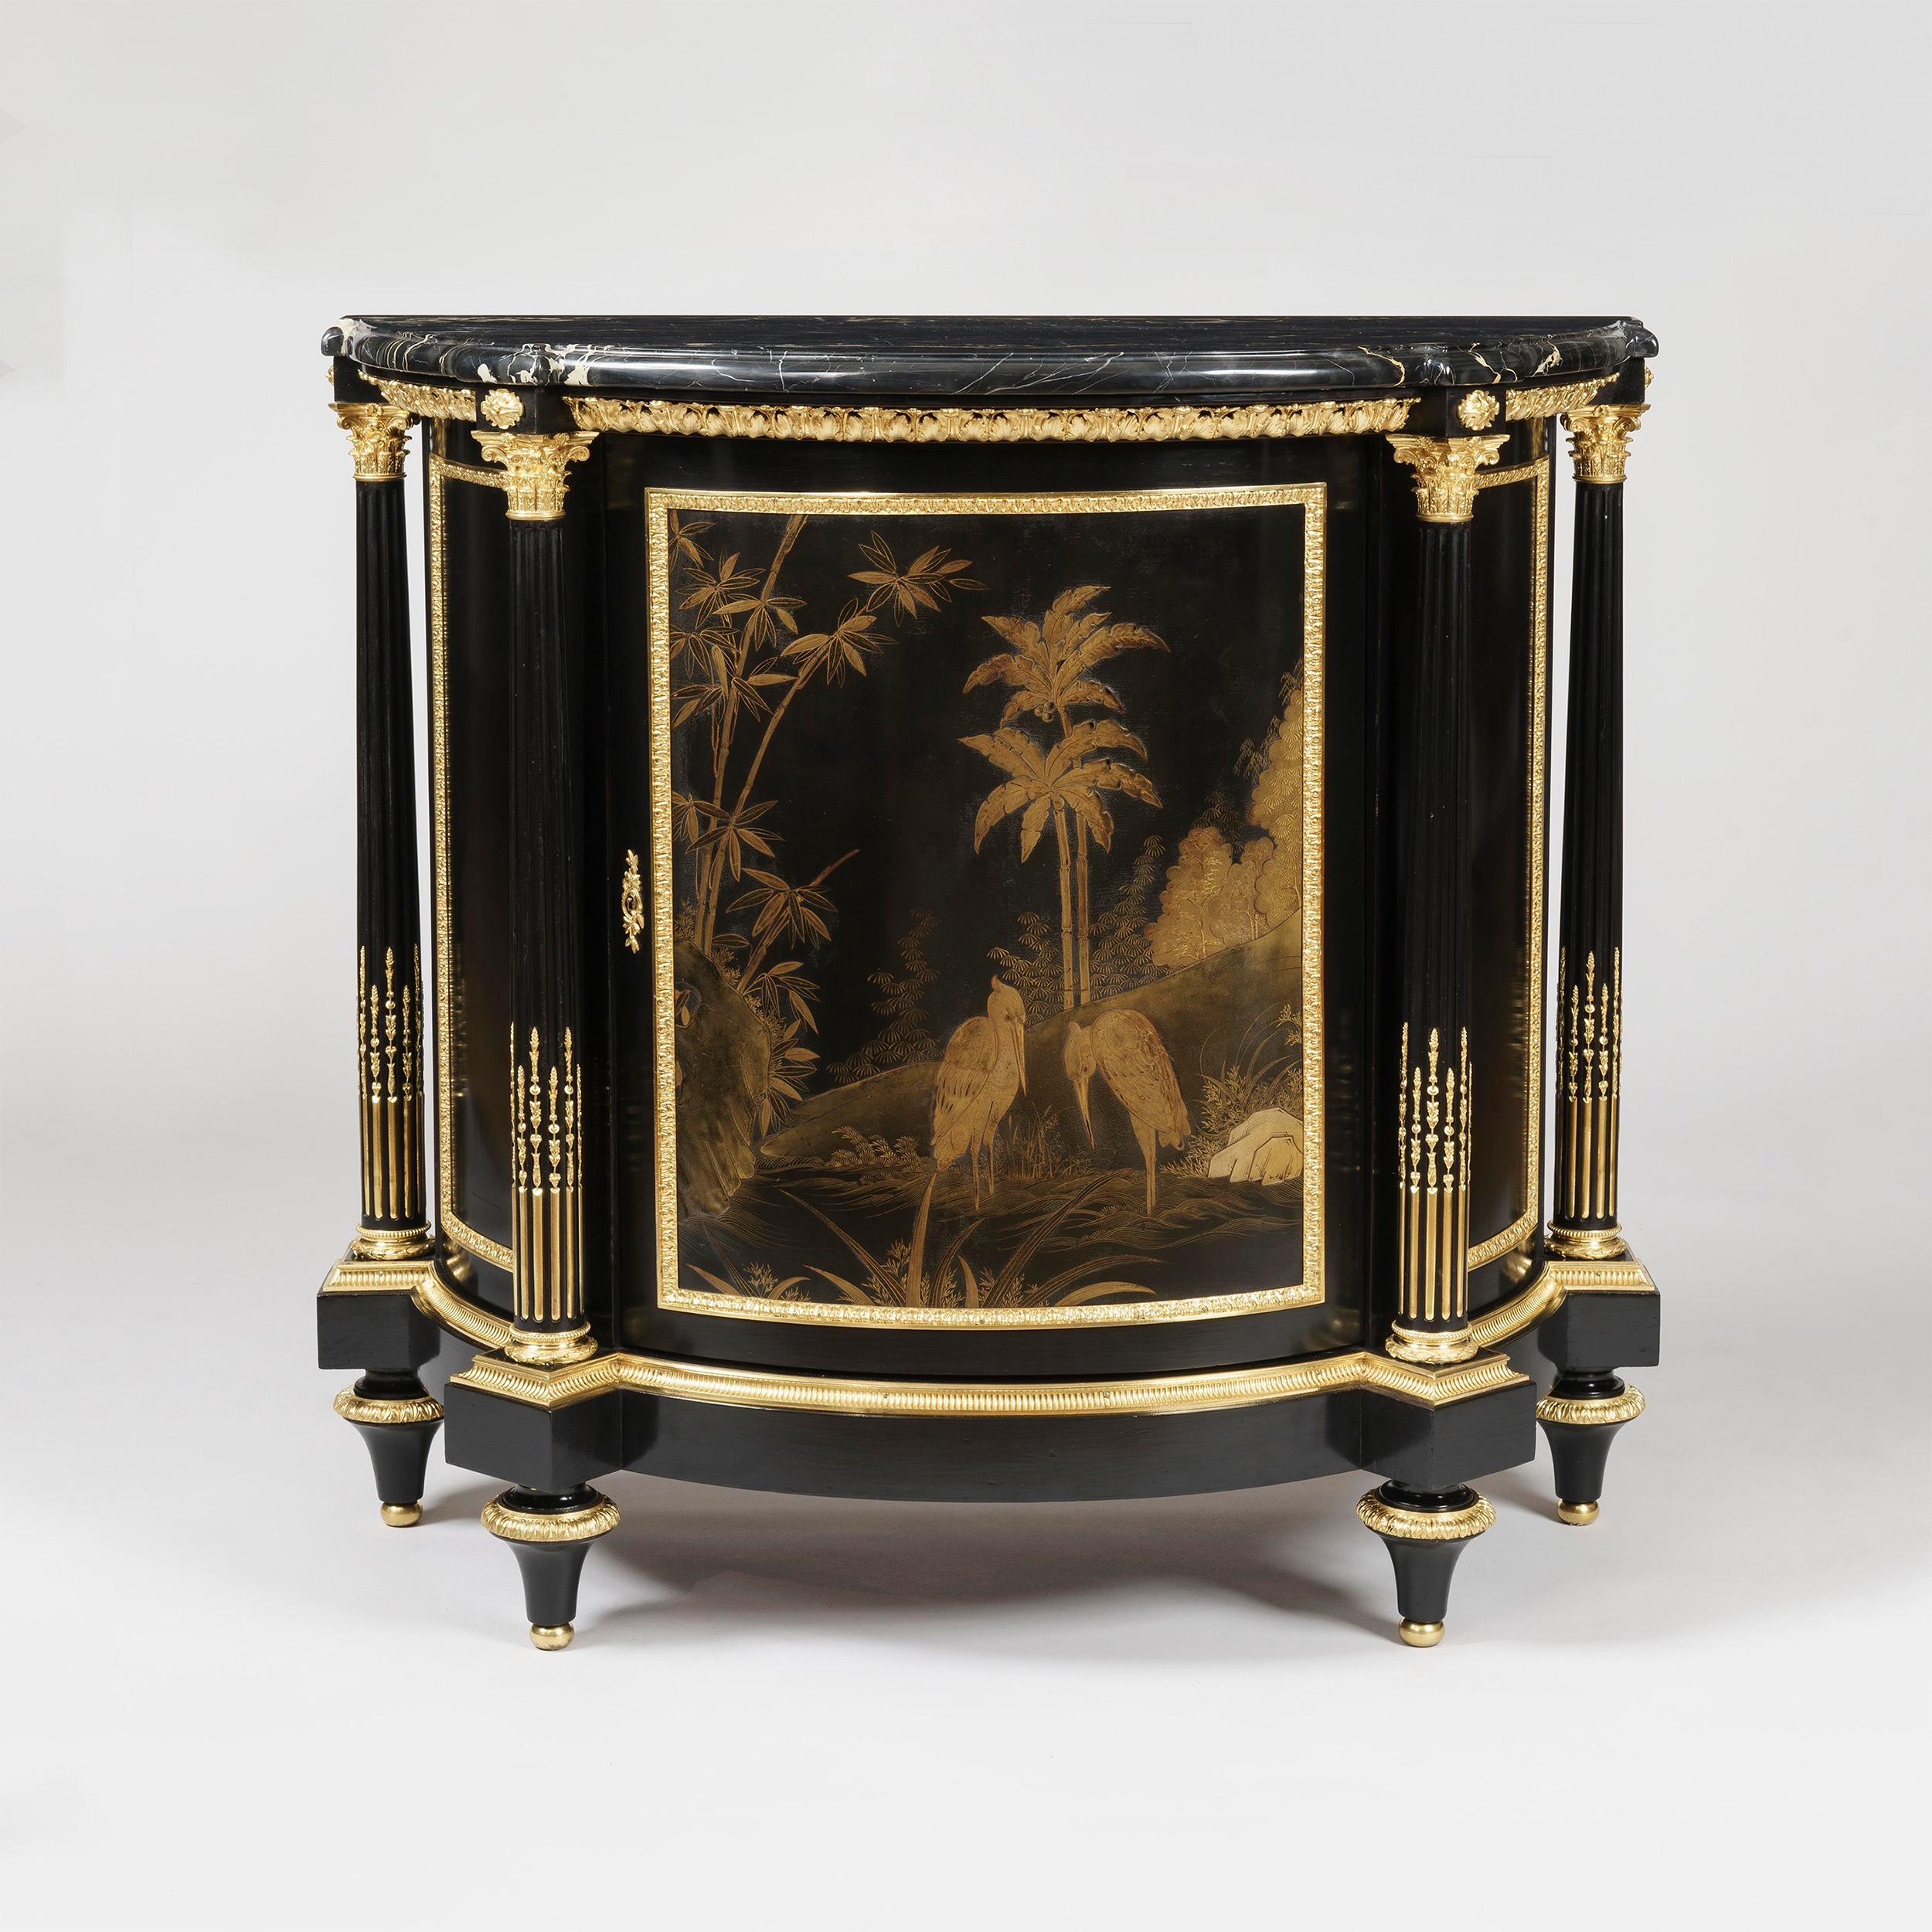 A pair of cabinets in the Louis XVI manner
By Maison Millet of Paris

The pair of demilune cabinets constructed from bois noirci, rising from tapering toupie feet, the curved front inset with fine imported Japanese lacquer panels and flanking